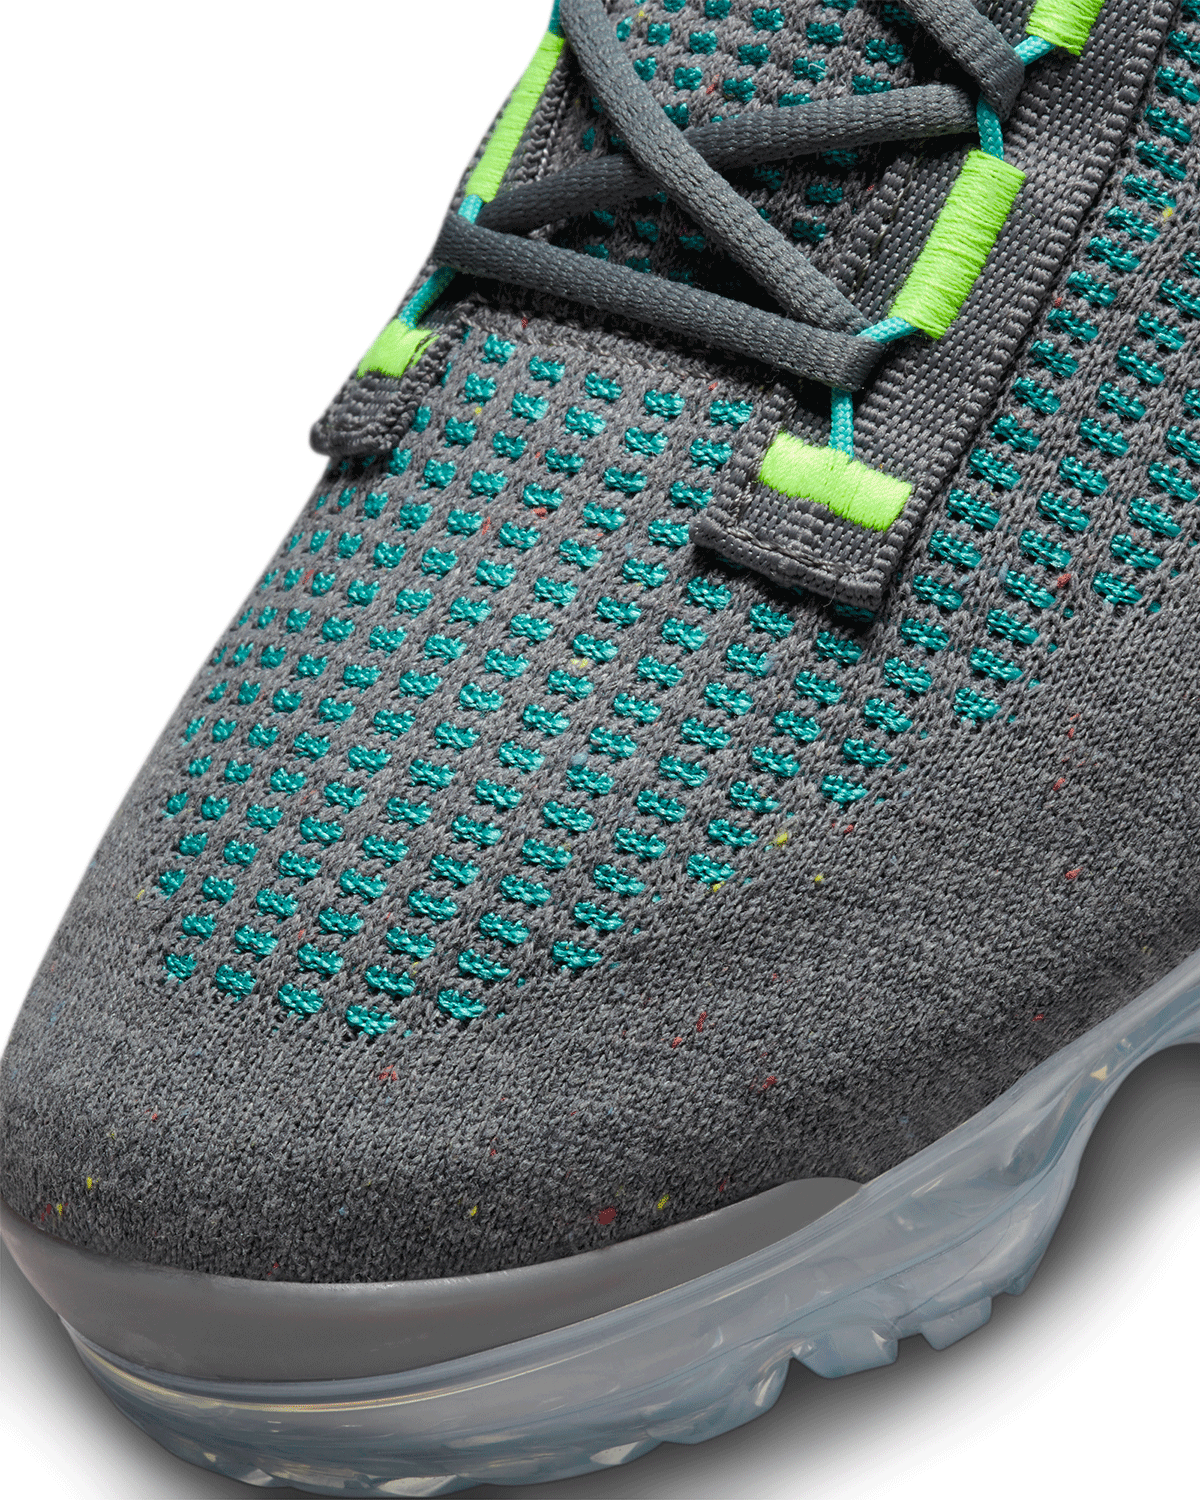 Air VaporMax Flyknit Cool Grey/Washed Teal/Iron Grey